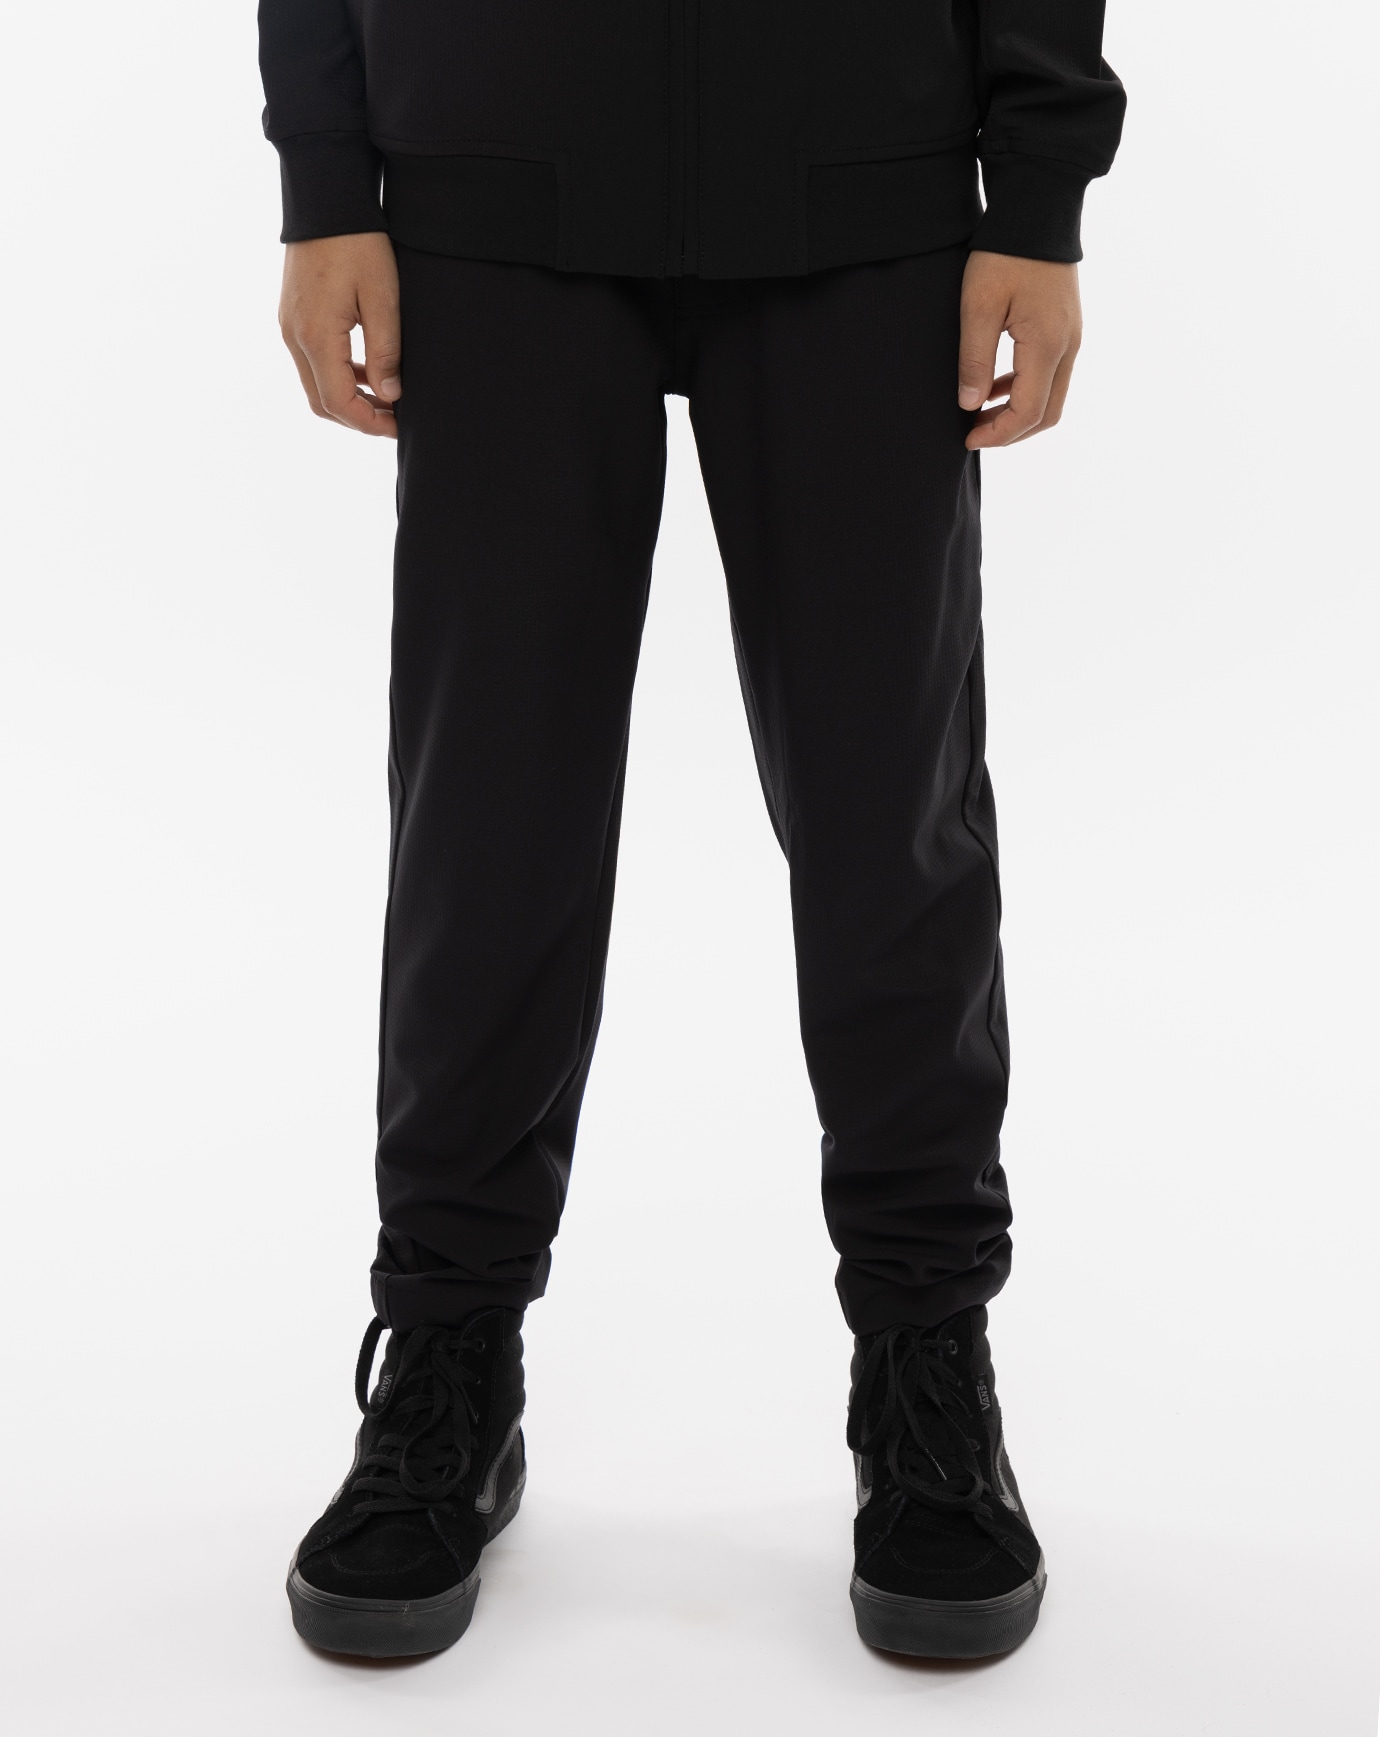 Related Product - TRAVEL YOUTH PANT